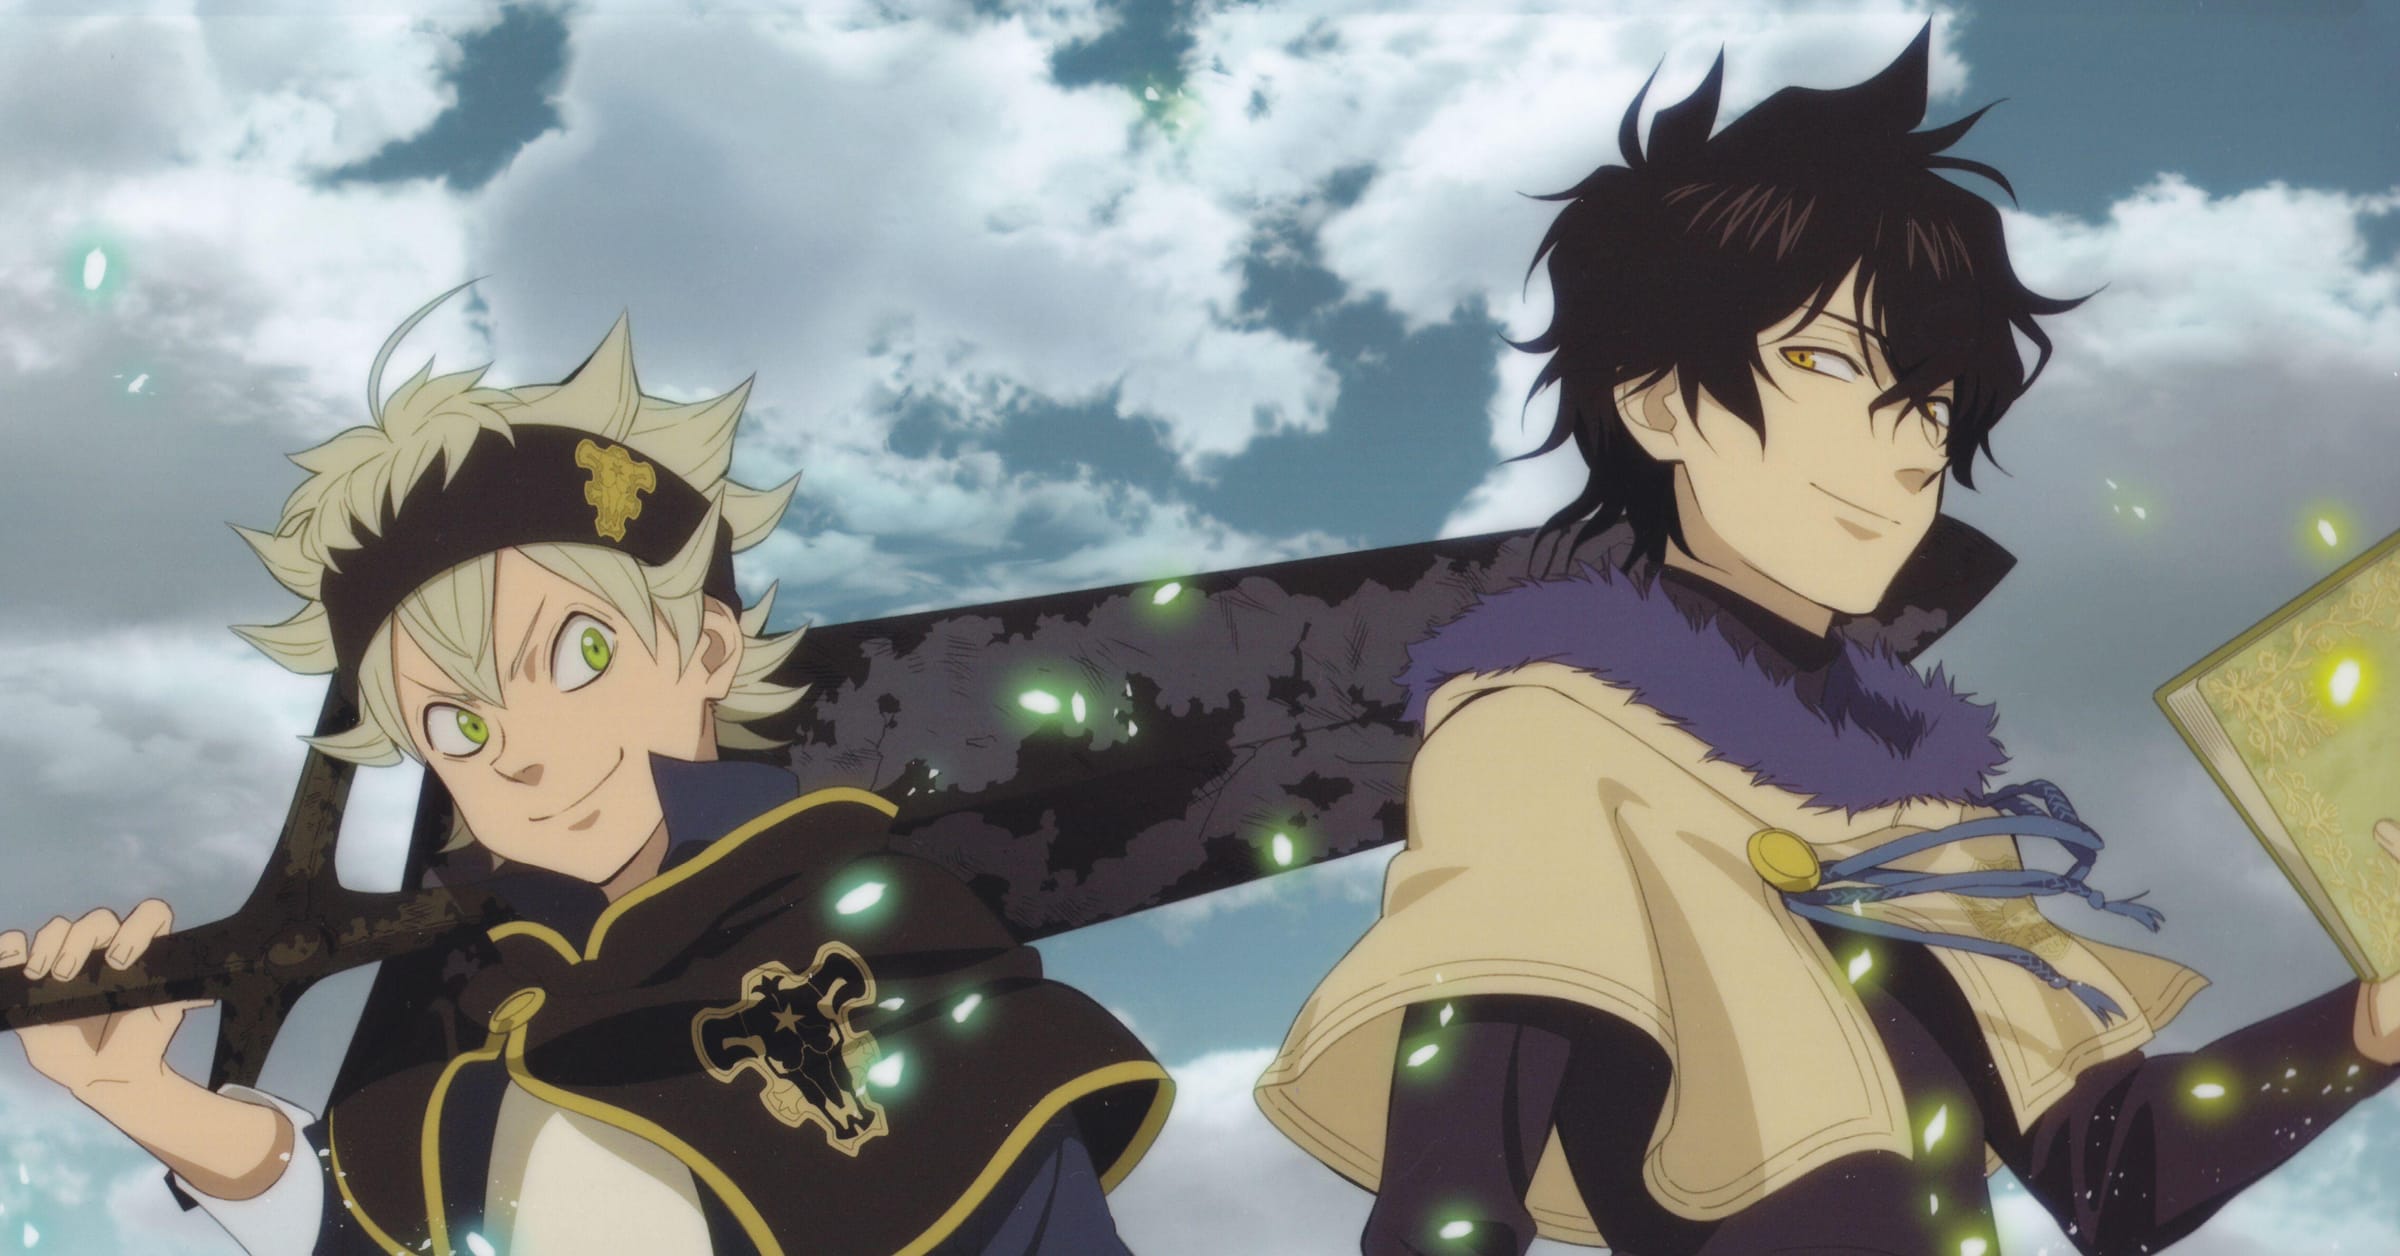 10 Anime Like Black Clover You Should Watch - Cultured Vultures